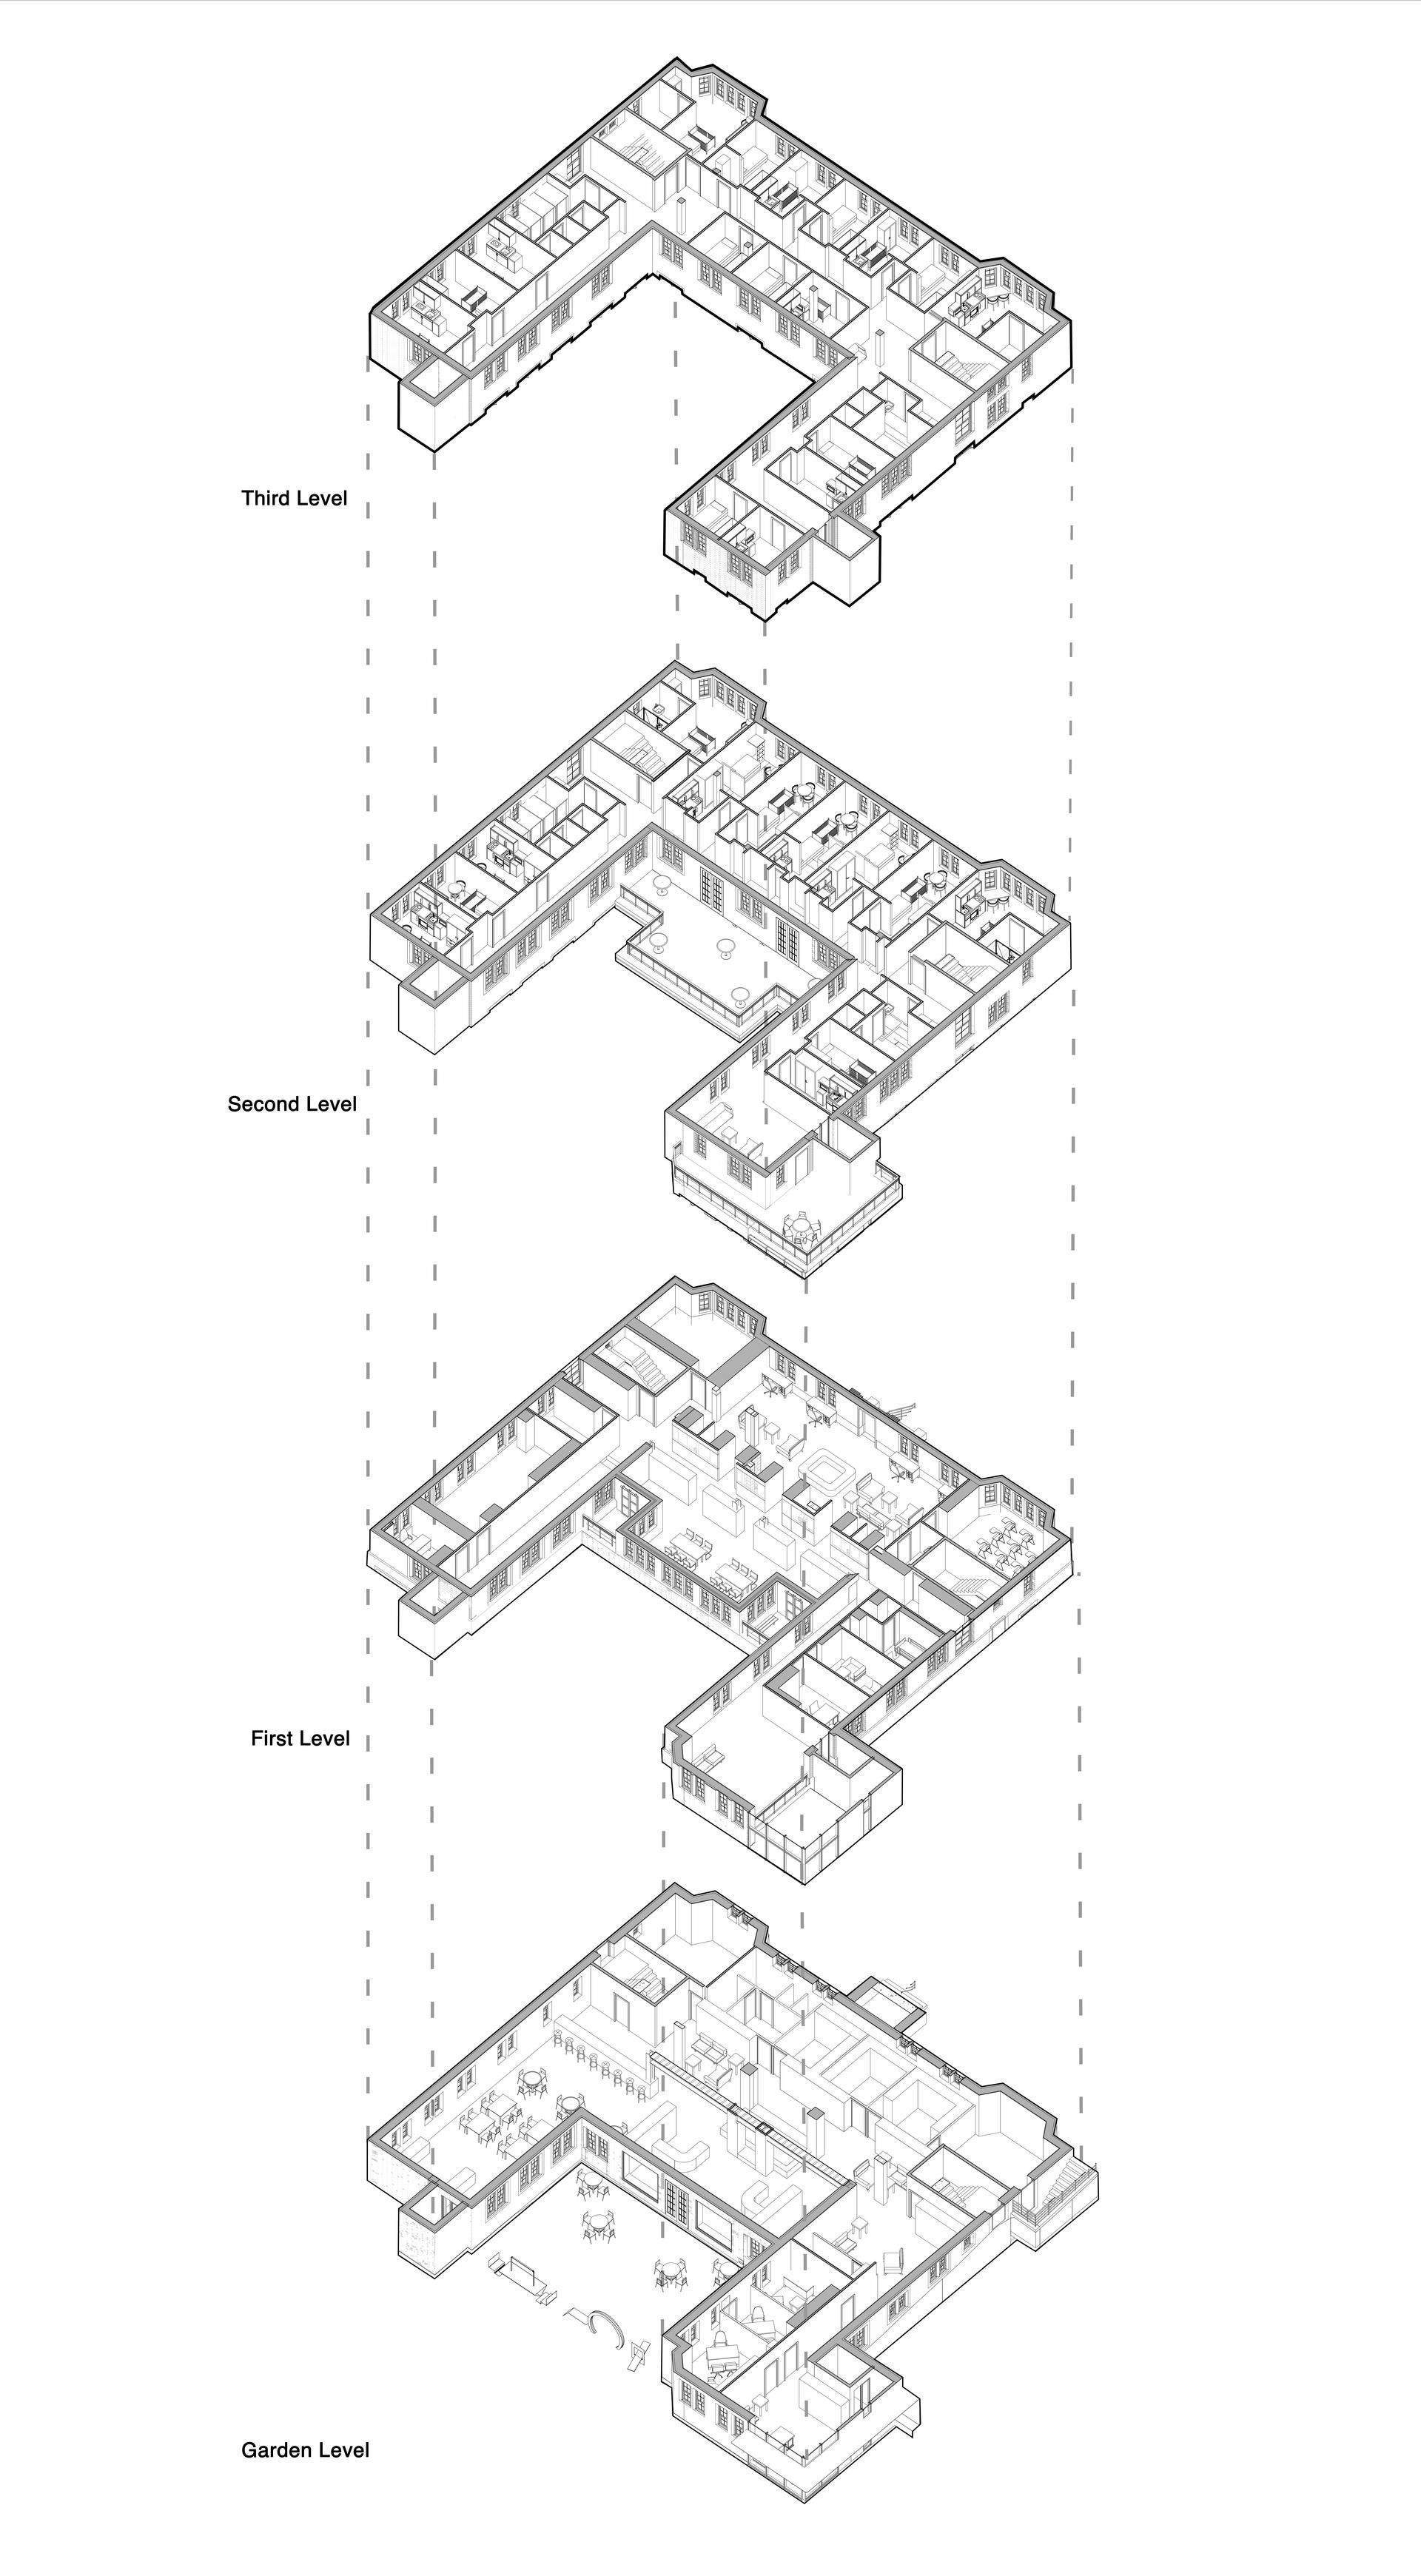 Views showing spatial planning and accessibility of each floor.